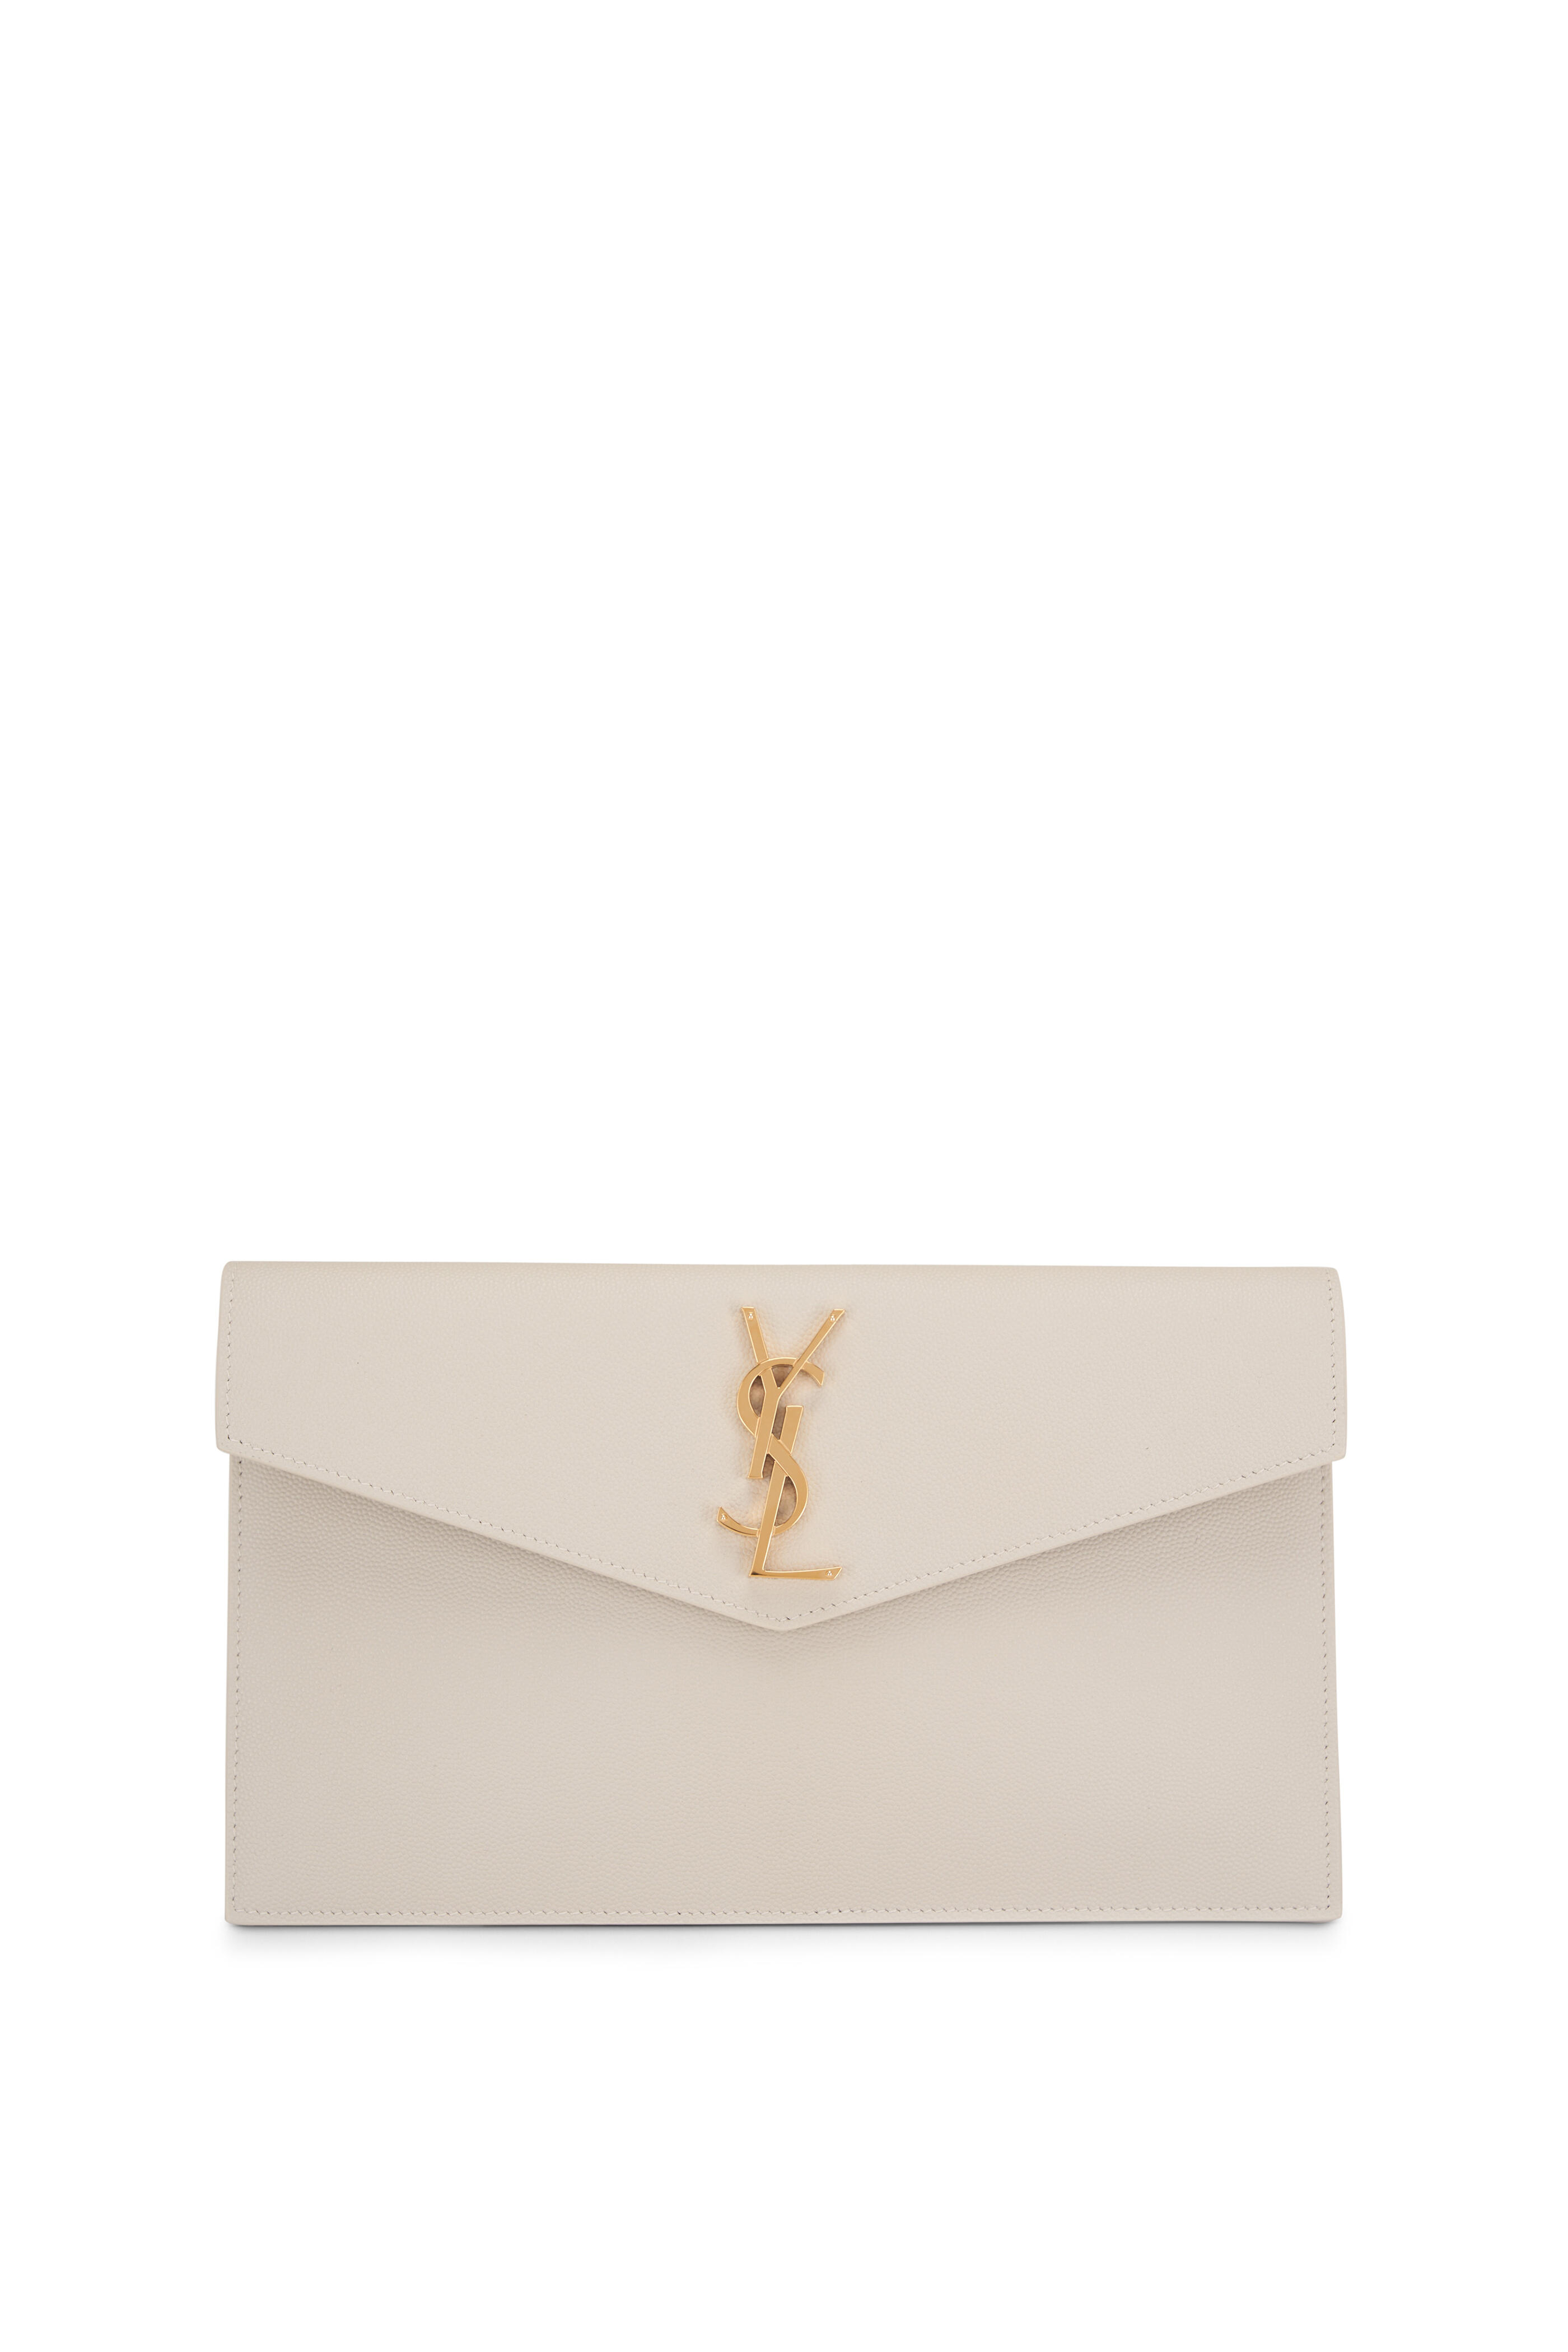 YSL Uptown Pouch, Crocodile Embossed White Leather